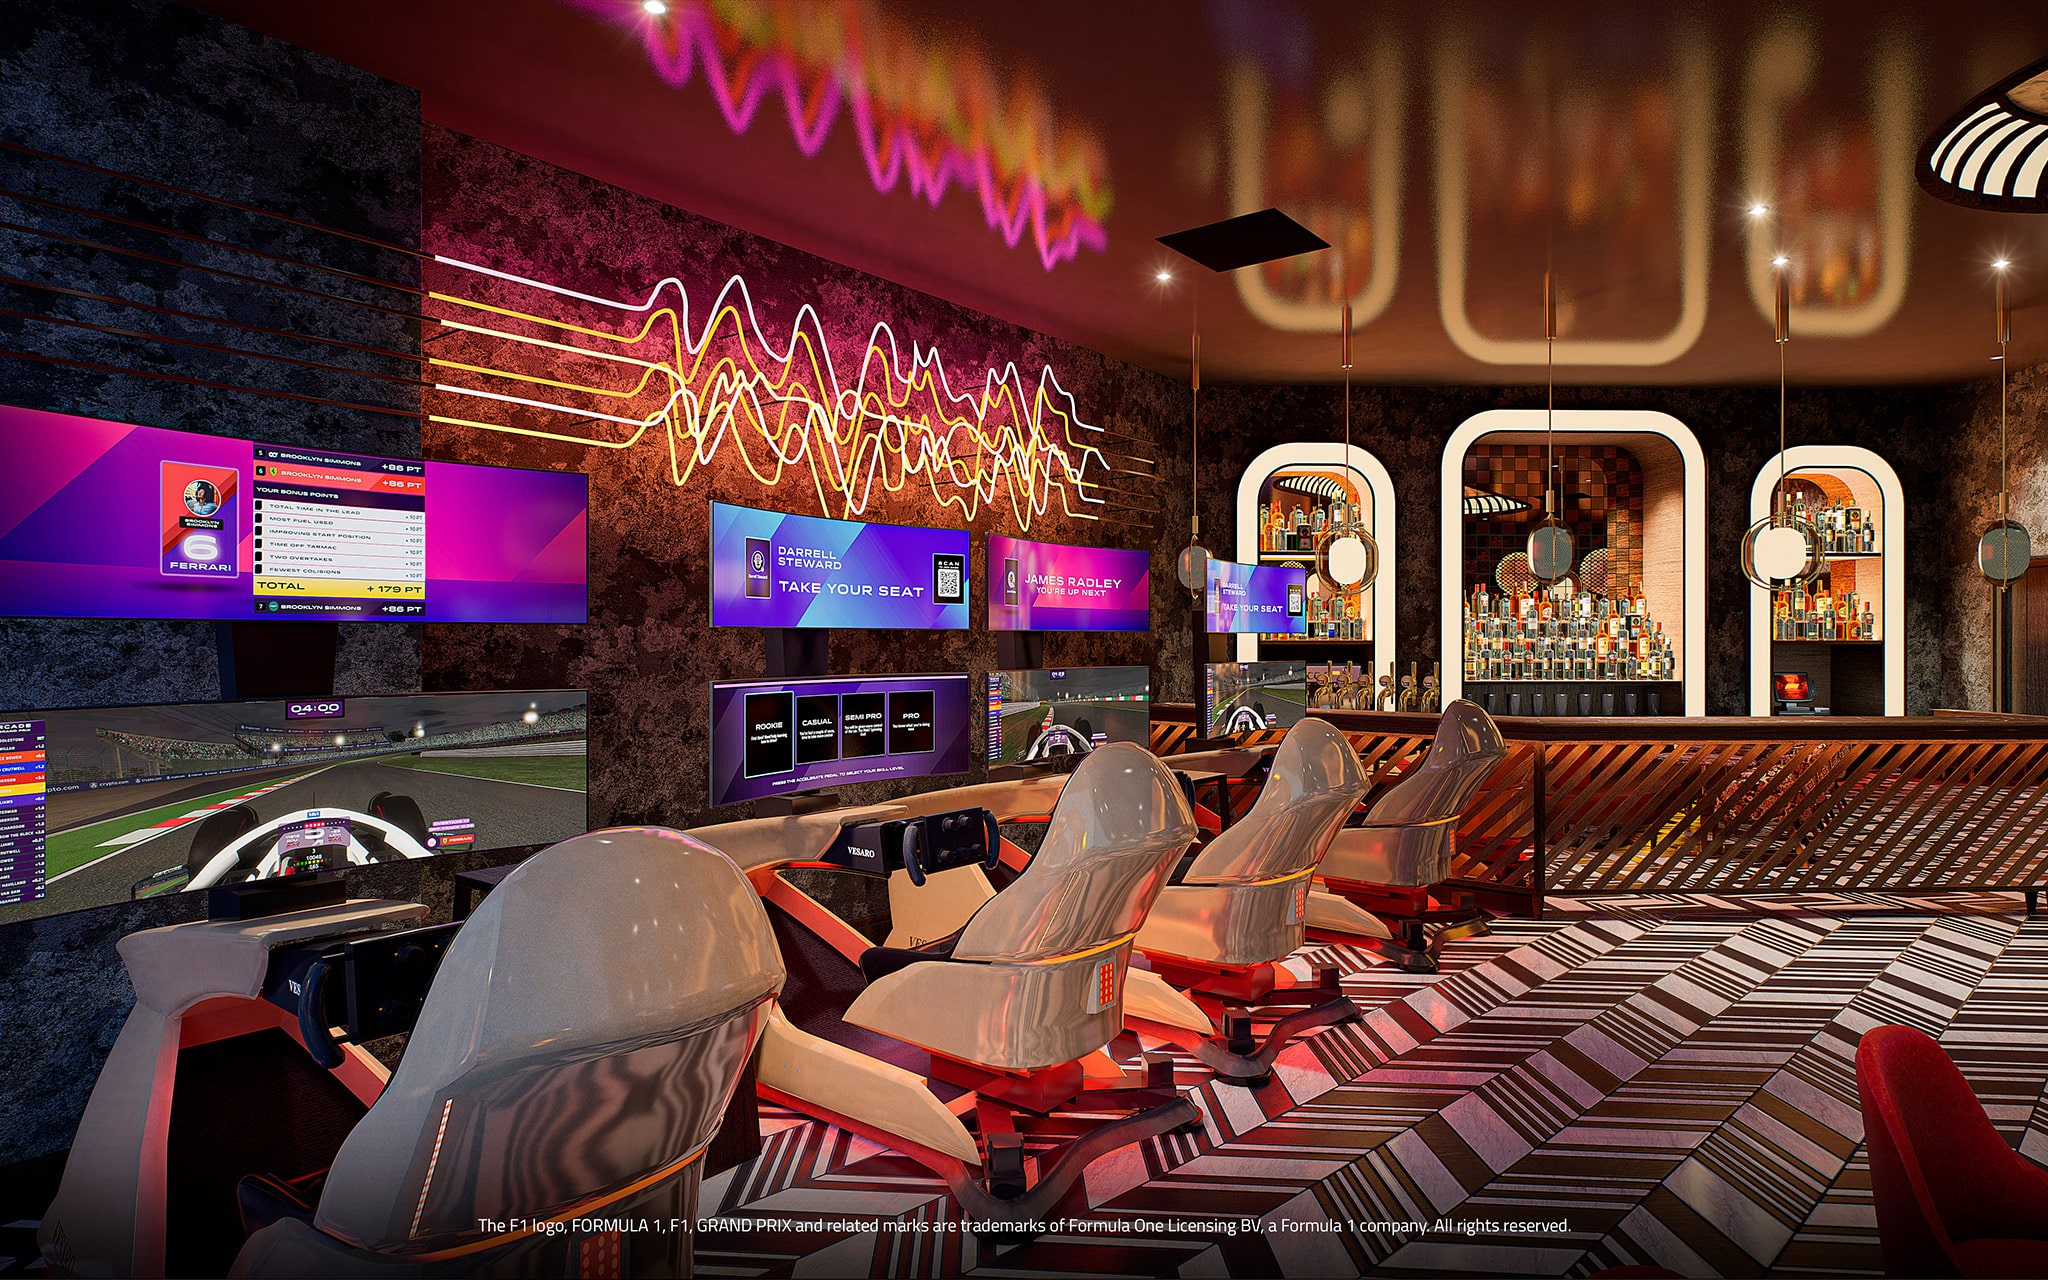 Driving video game booths, with full curved surround screen, steering wheel and pedals controllers and large speaker sound system, with a lavish bar area in the background.